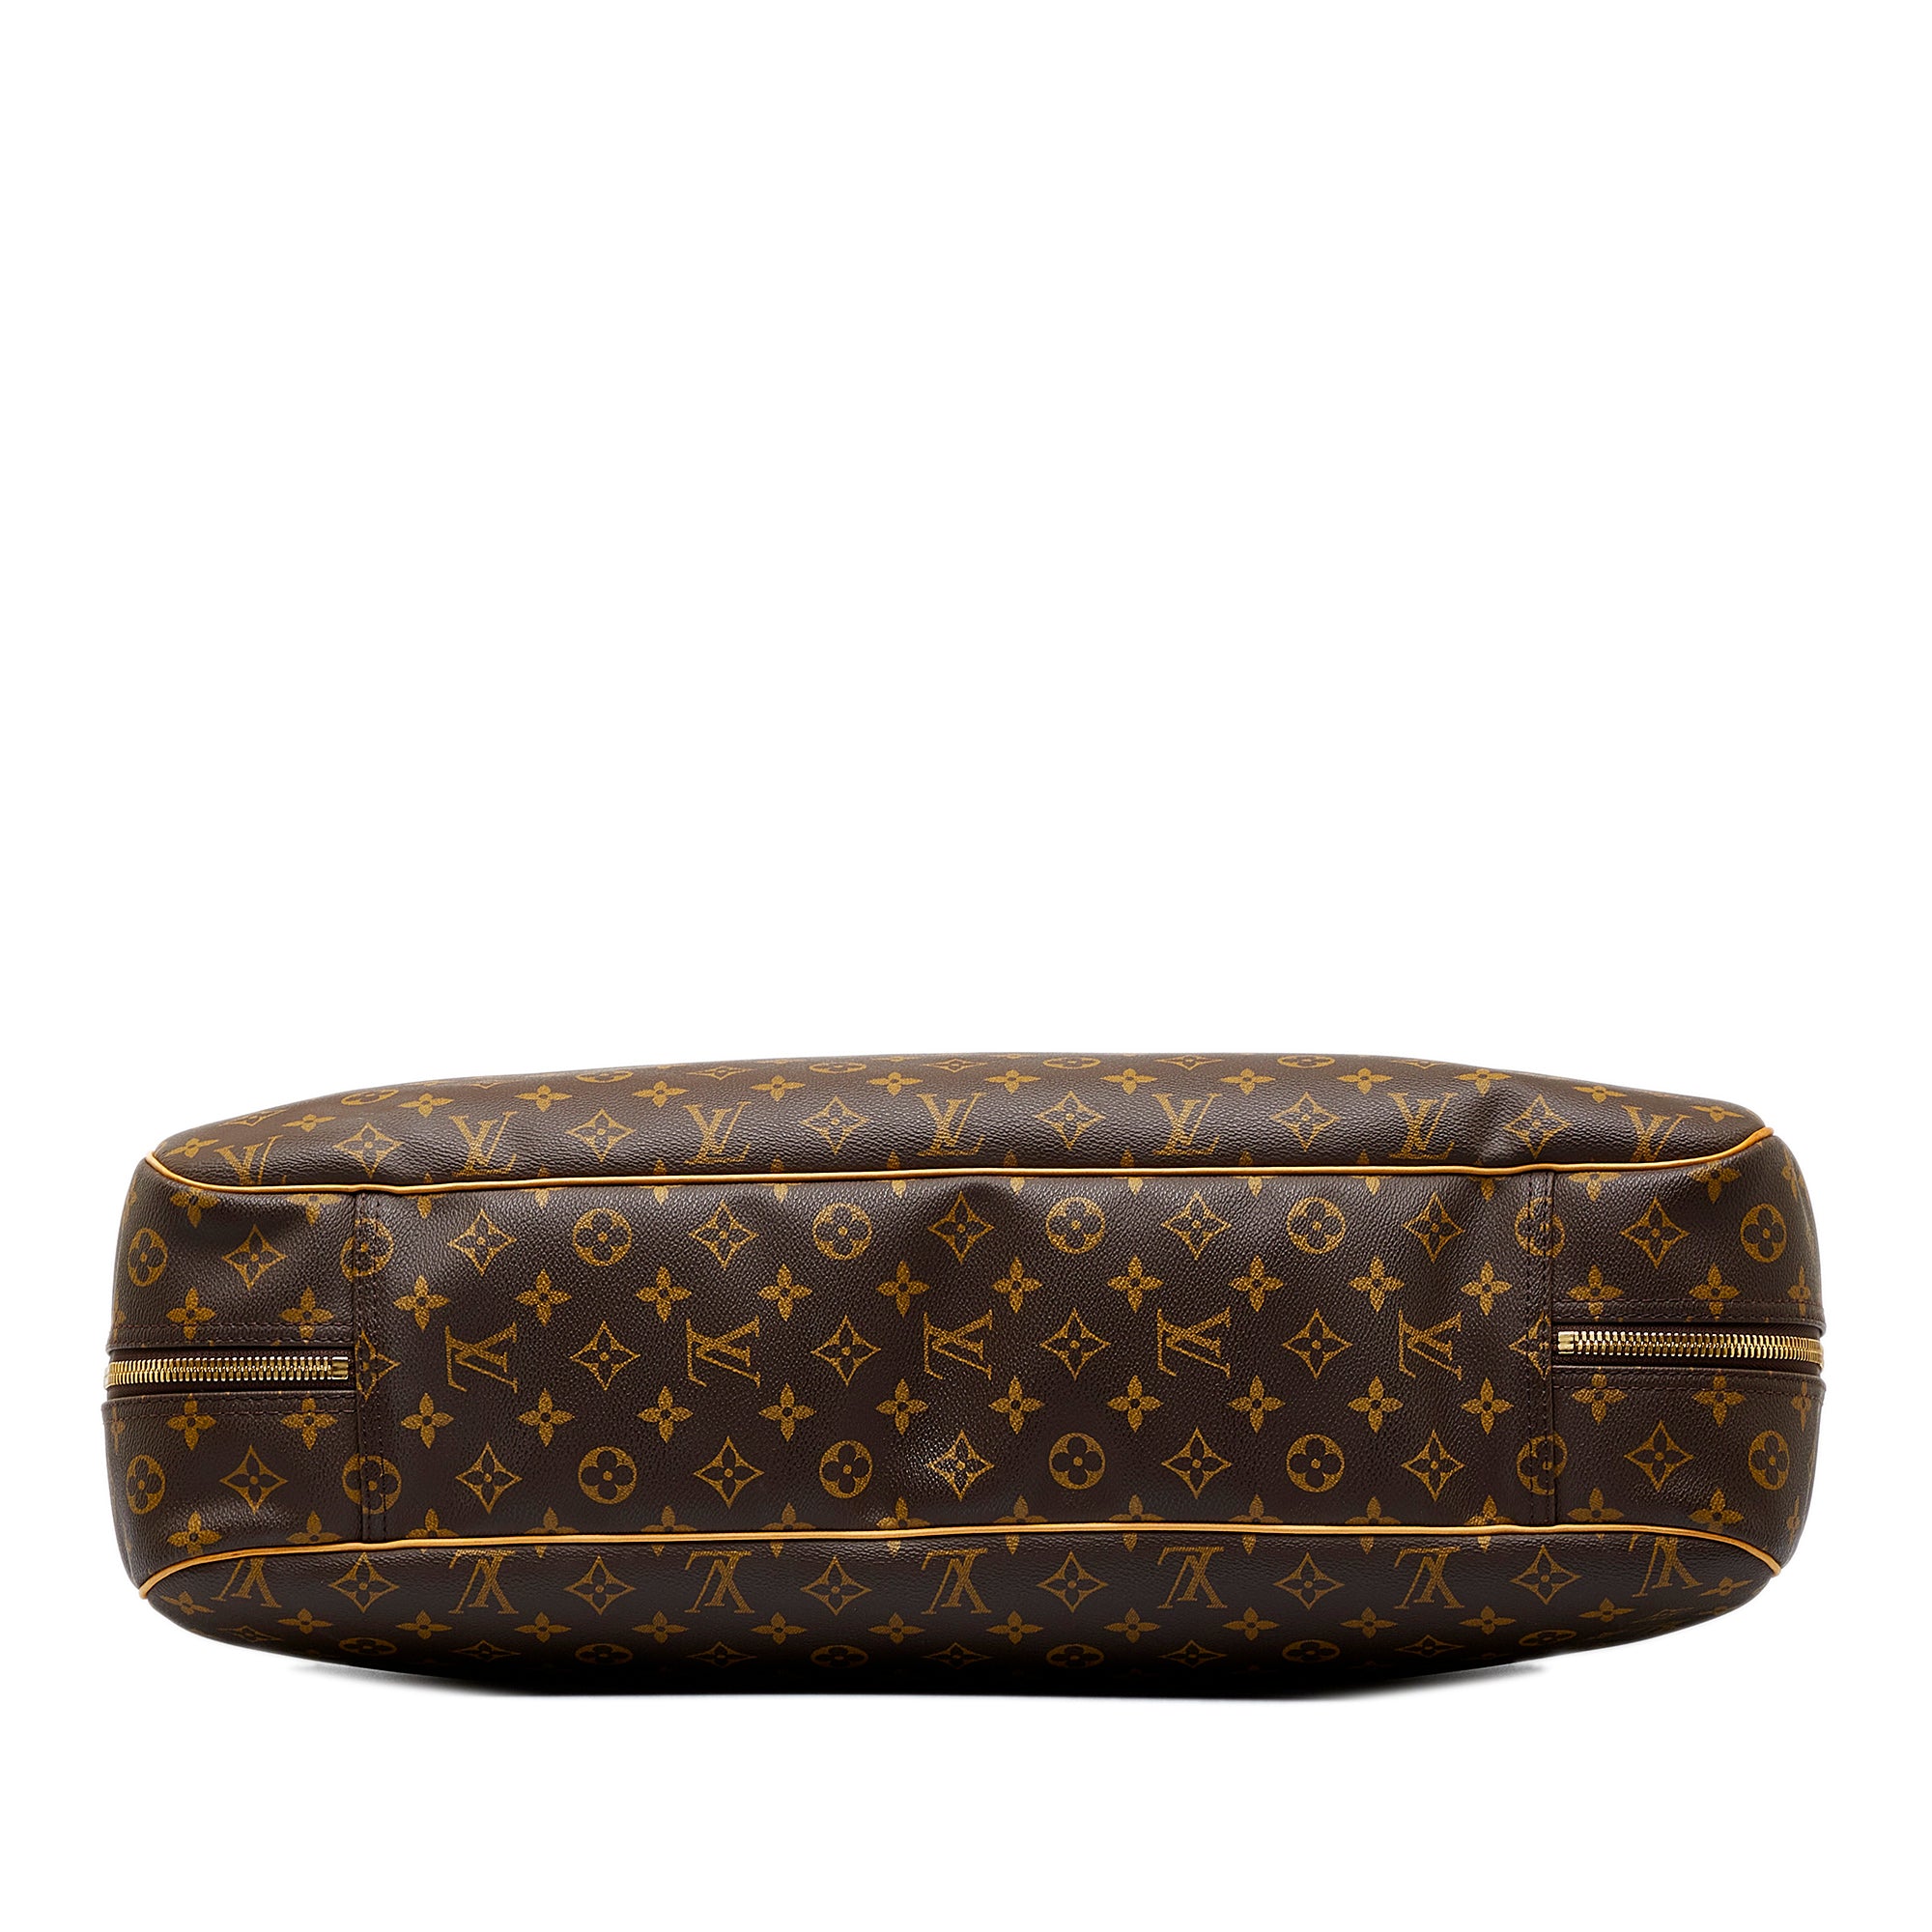 Louis Vuitton, Bags, Alize Double Sided Luggage Bag